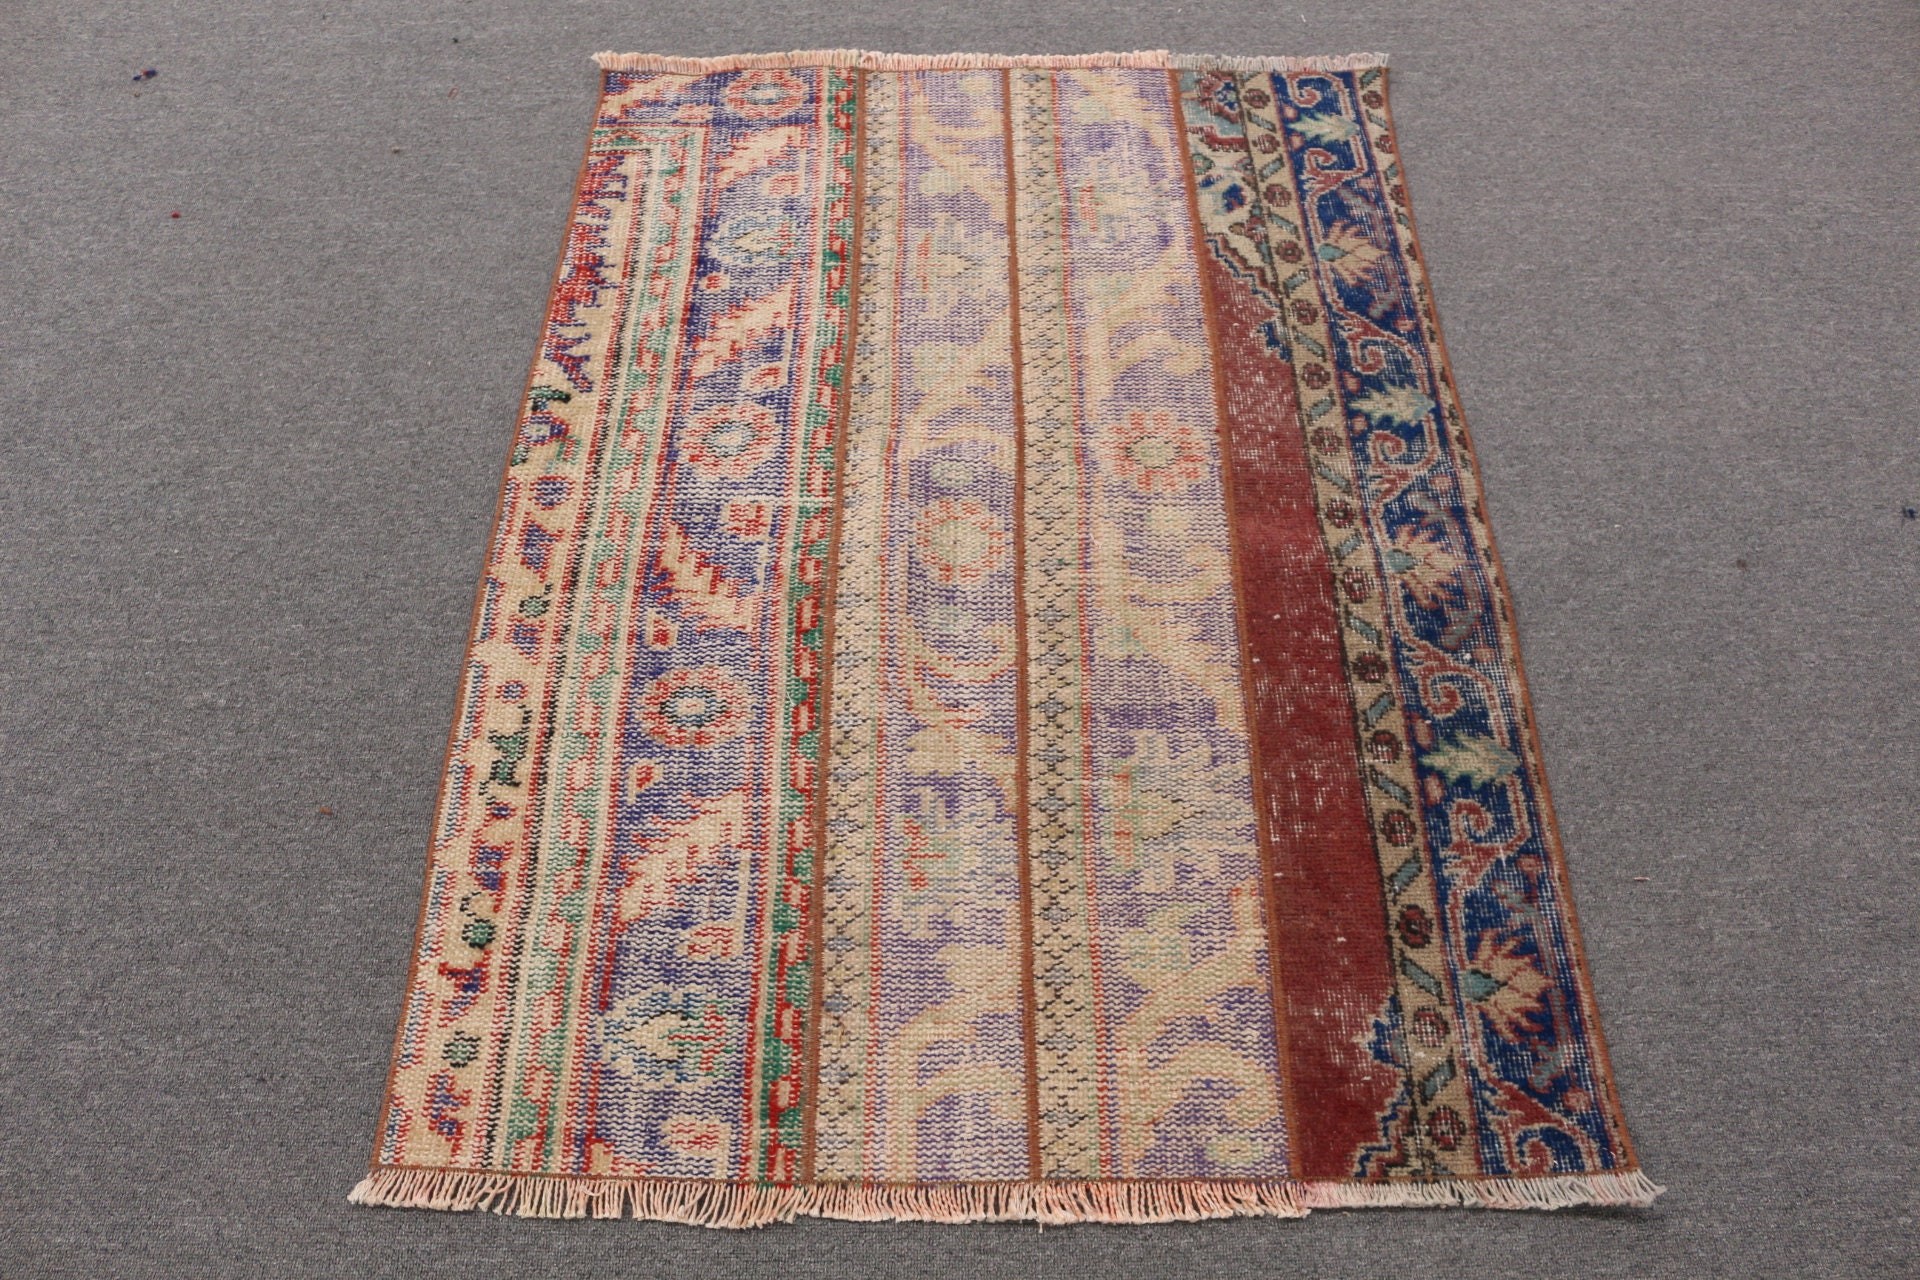 Vintage Rug, Antique Rugs, Outdoor Rugs, Anatolian Rug, Bath Rugs, 3.1x4.2 ft Small Rug, Kitchen Rug, Blue Home Decor Rugs, Turkish Rug